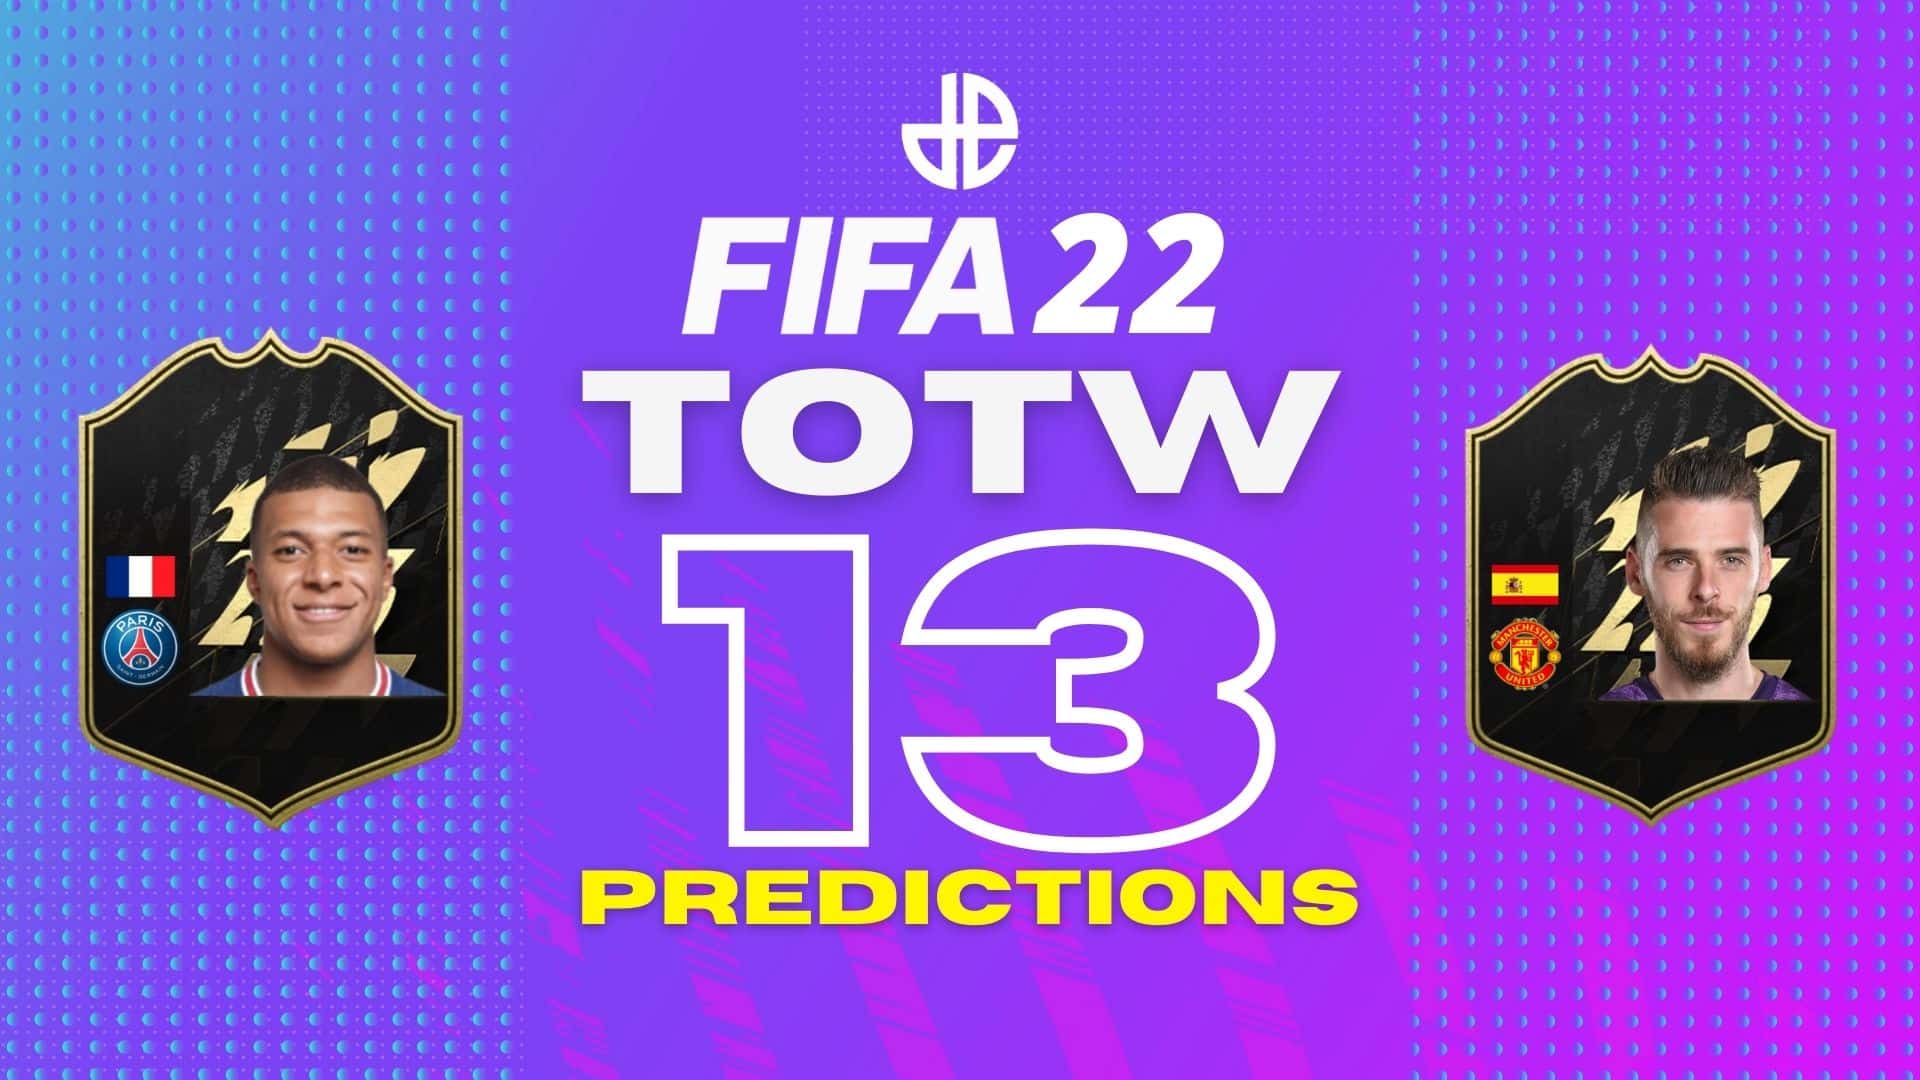 FIFA 22 TOTW 13 prediction cards with Mbapee and De Gea